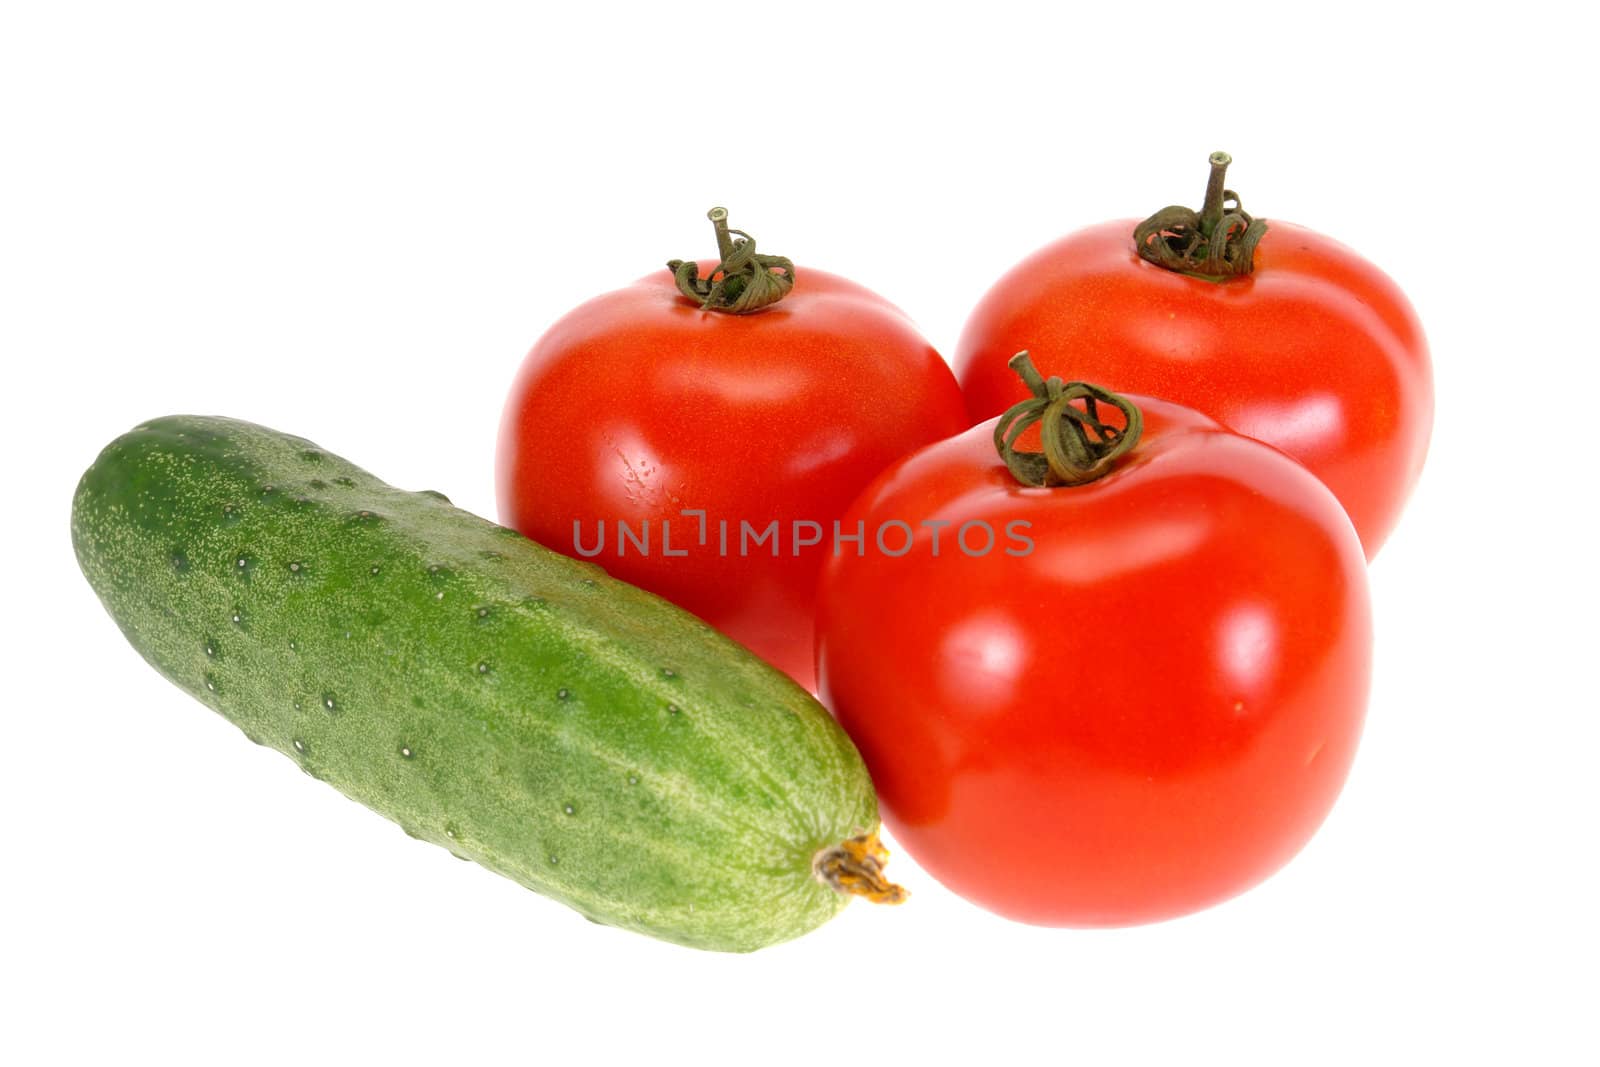 cucumber with tomato by uriy2007